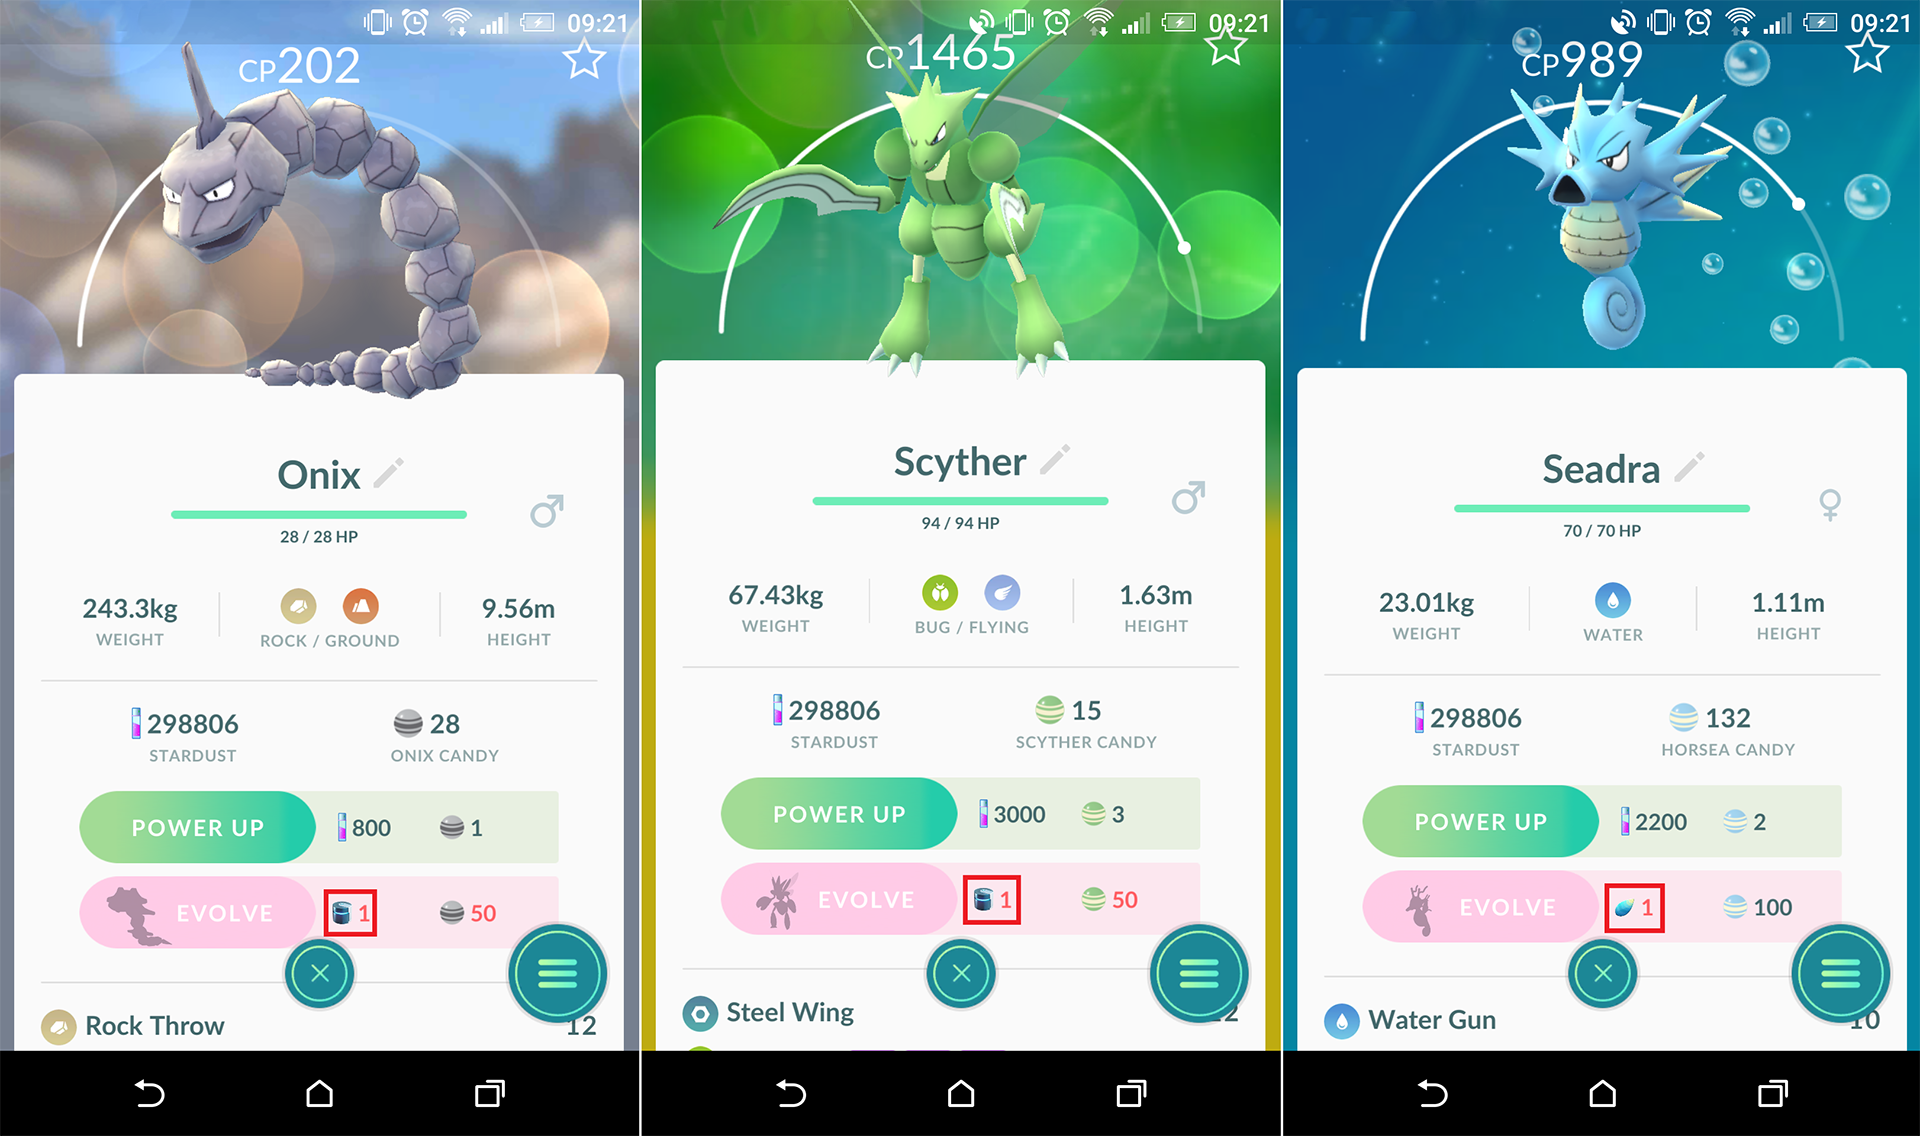 How to Find and use the New Evolution Items and New Berries in Pokemon GO.